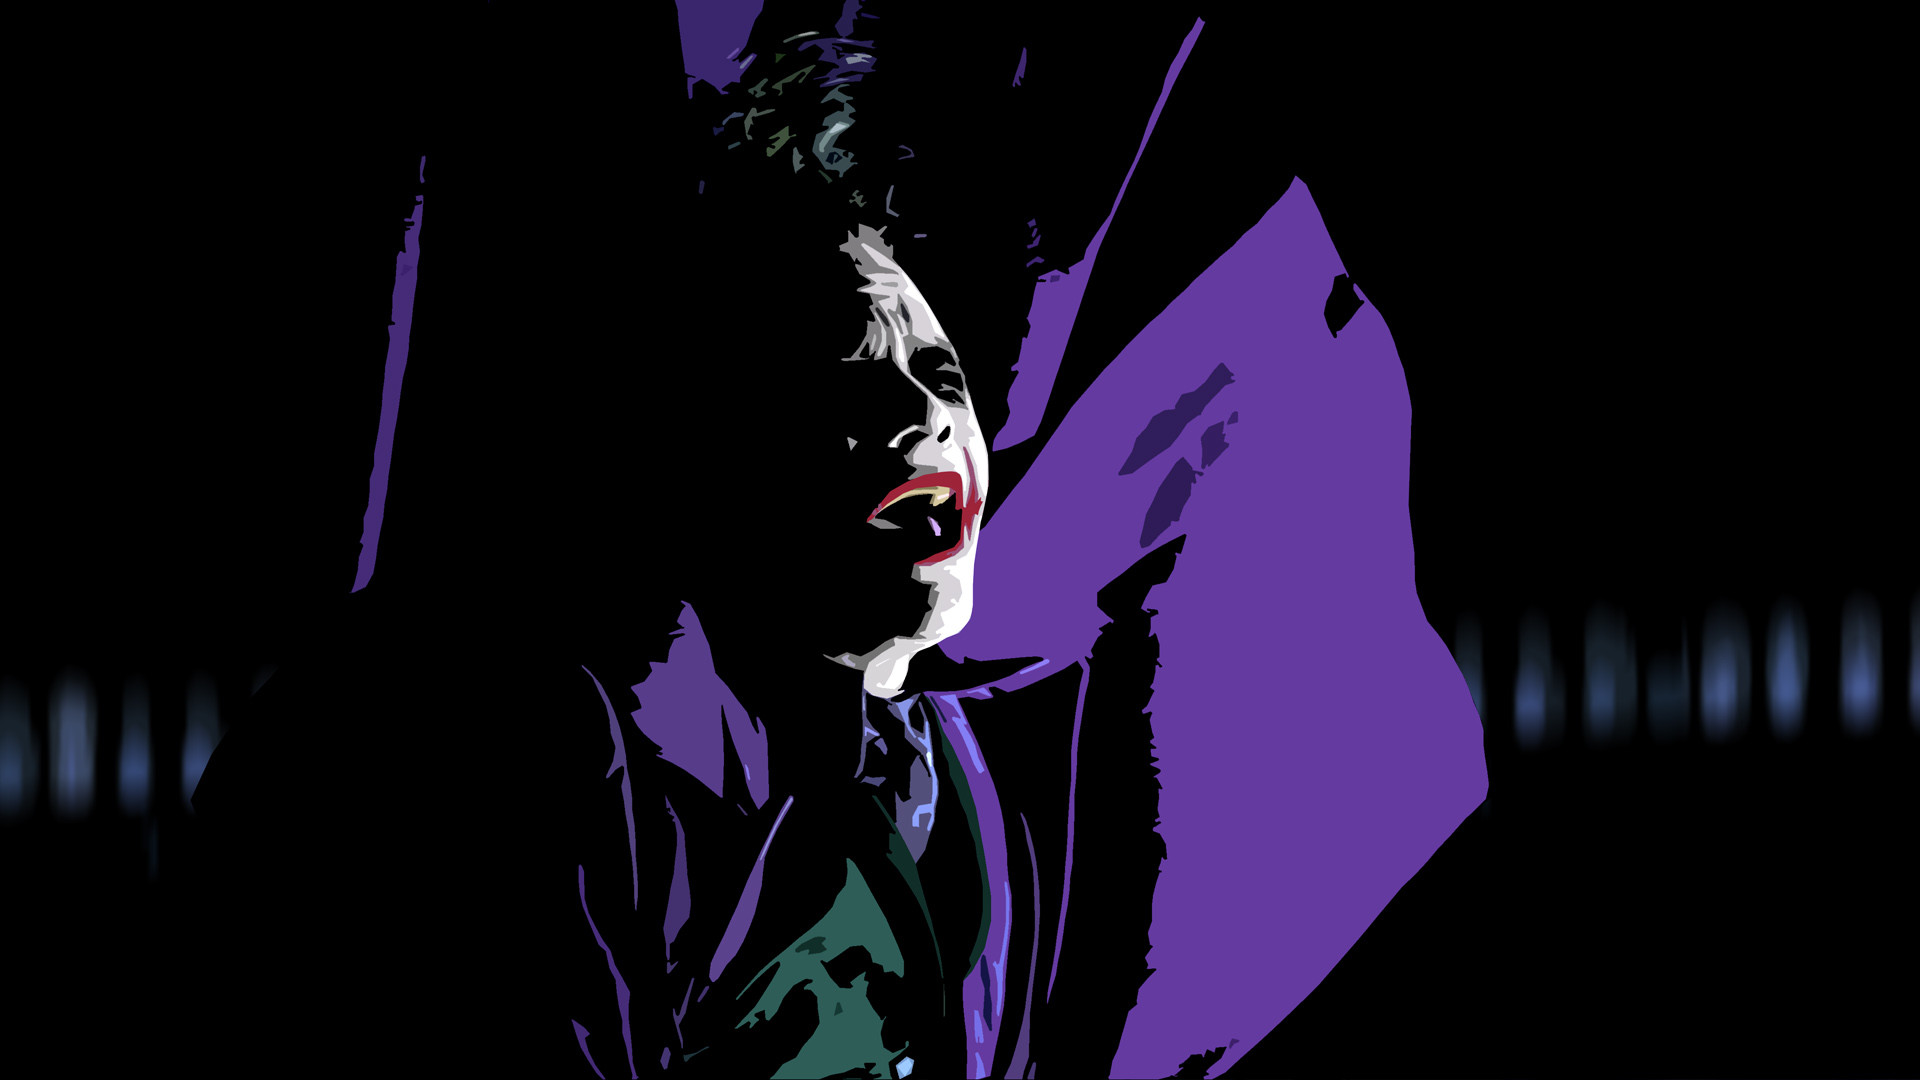 1920x1080 Backgrounds For > Animated Joker Hd Wallpapers 1080p